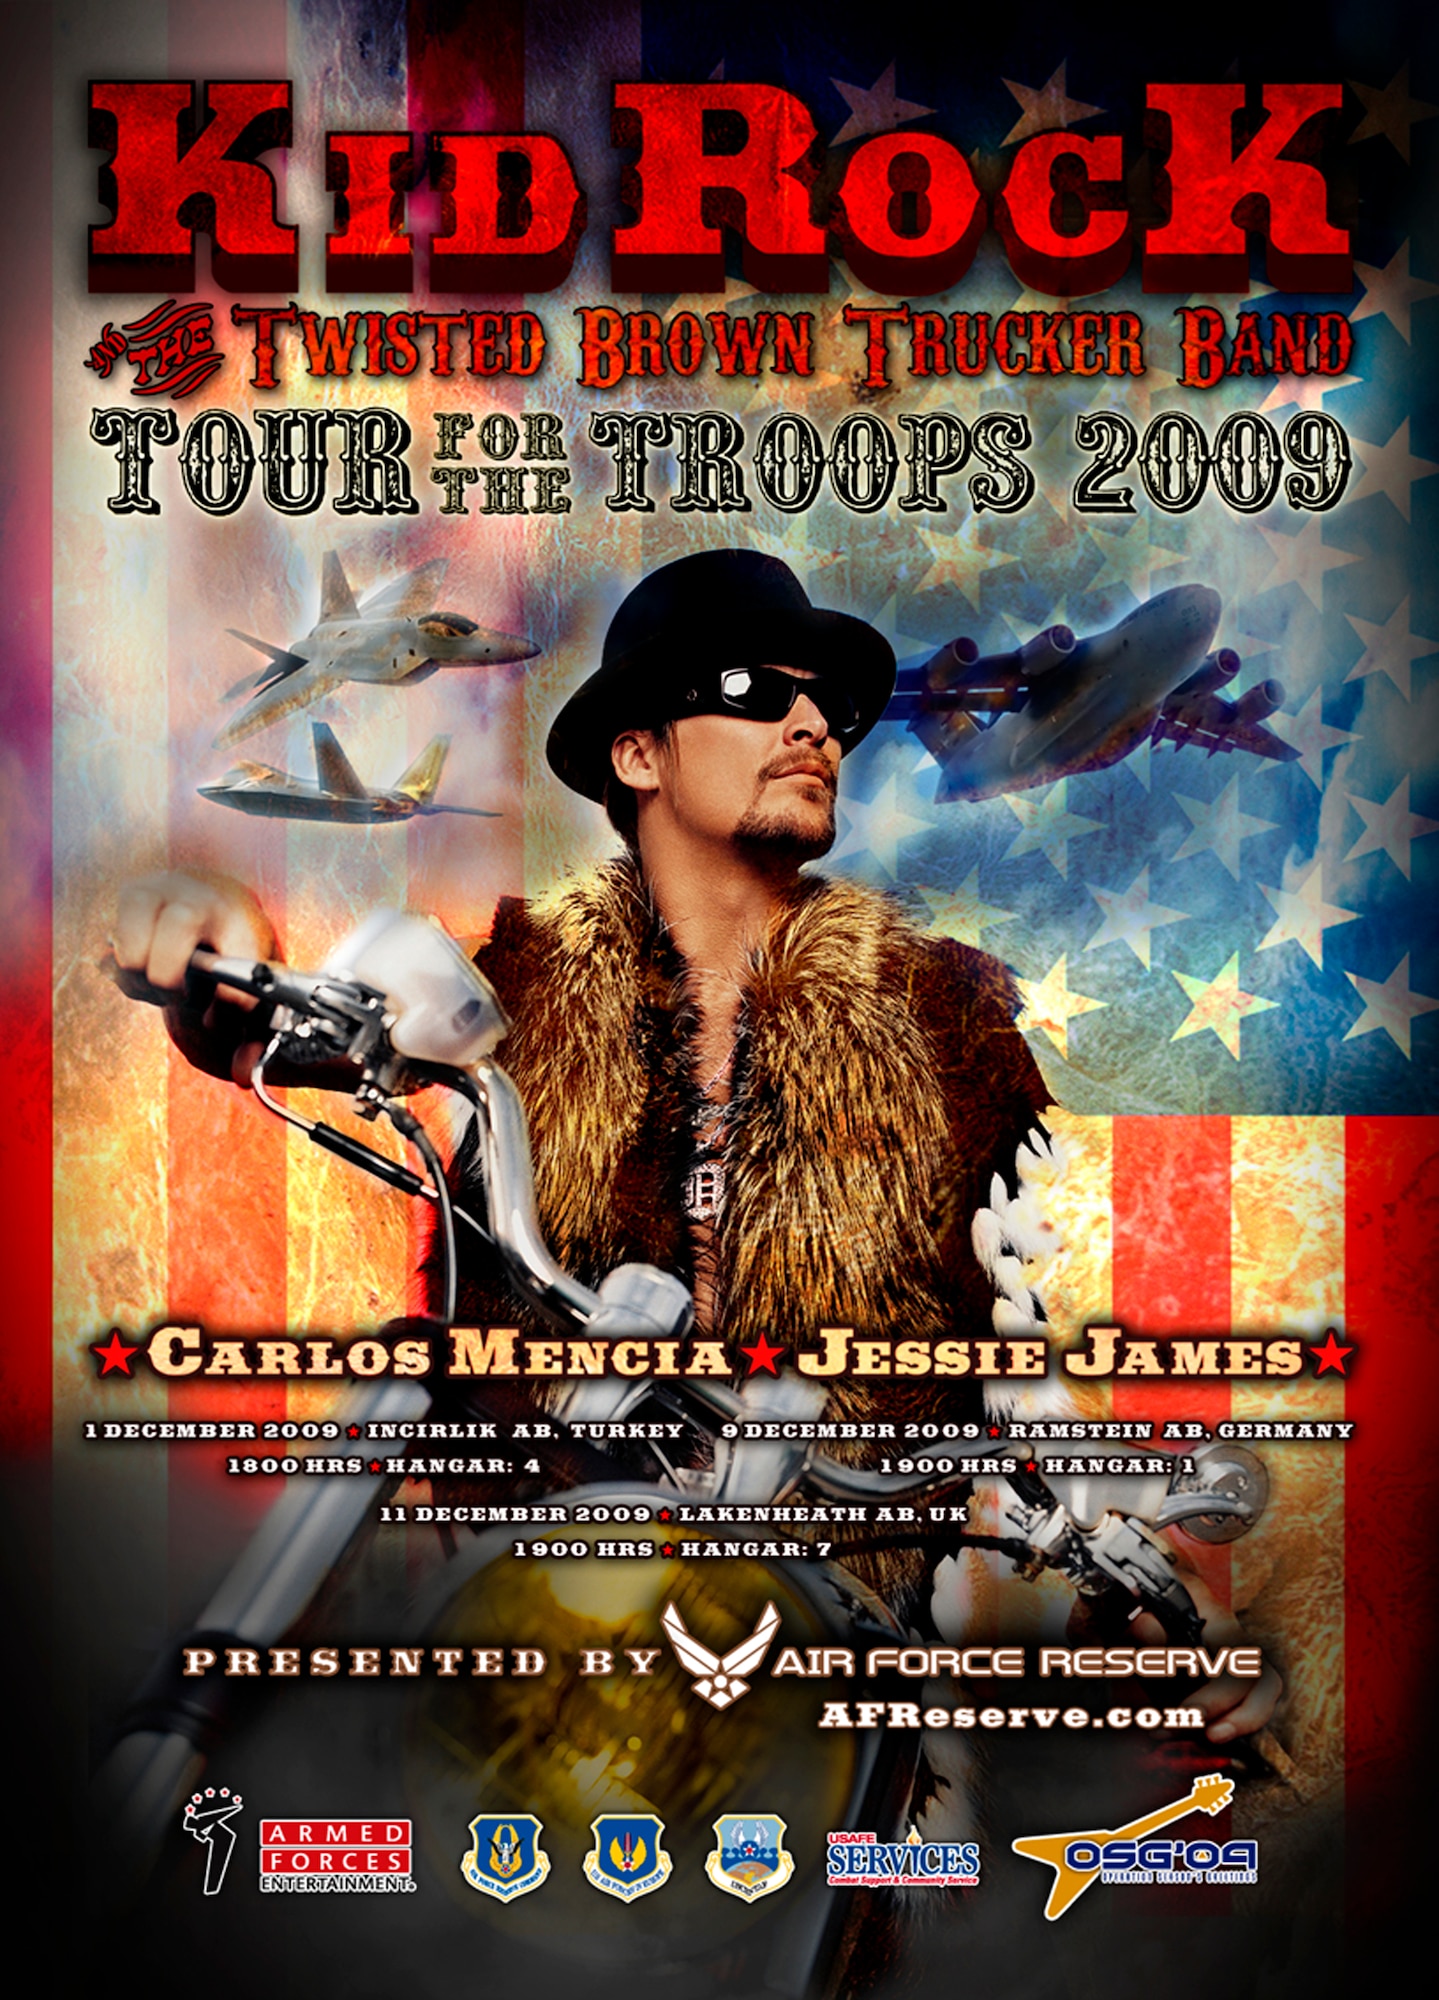 Kid Rock and the Twisted Brown Trucker Band will bring their unique blend of Southern rock, soul, country, heavy metal and hip hop music to American service members and their families this holiday season when they headline Tour for the Troops 2009, formerly known as Operation Season's Greetings. Kid Rock and his band will entertain American troops in Southwest Asia and families in Europe Nov. 30 to Dec. 12. Joining them will be comedian Carlos Mencia, singer/songwriter Jessie James, and members of the Band of the Air Force Reserve. The Tour for the Troops features performances at Ramstein Air Base, Germany; Incirlik AB, Turkey; RAF Lakenheath, England; and a number of deployed locations in Southwest Asia. 